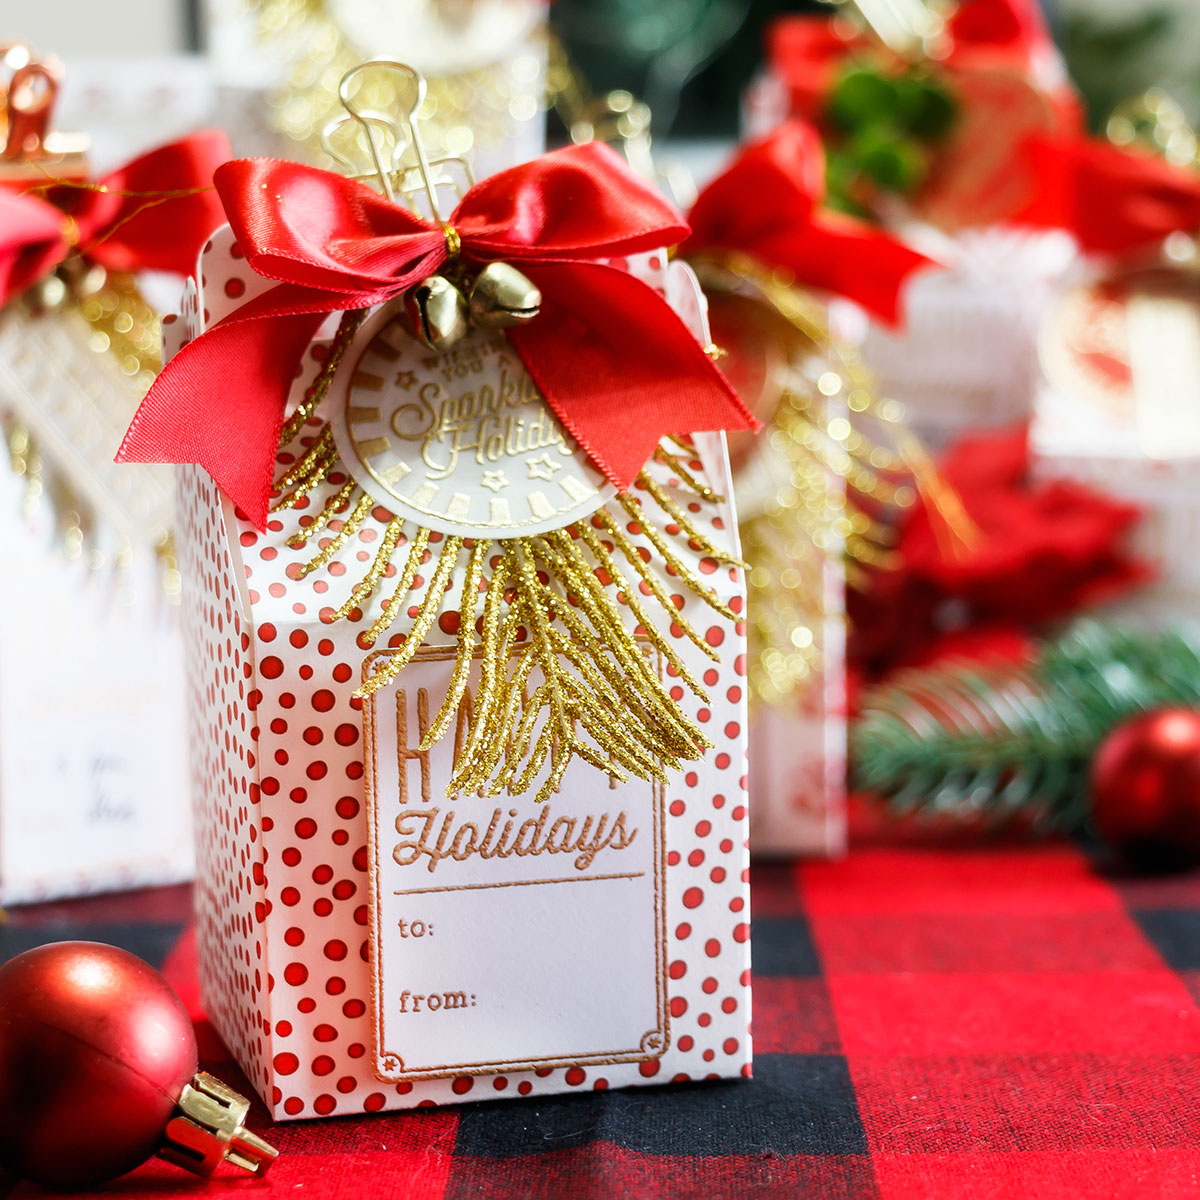 Last Minute Christmas Gift Box Ideas for Small Gifts. Video | | Yana Smakula